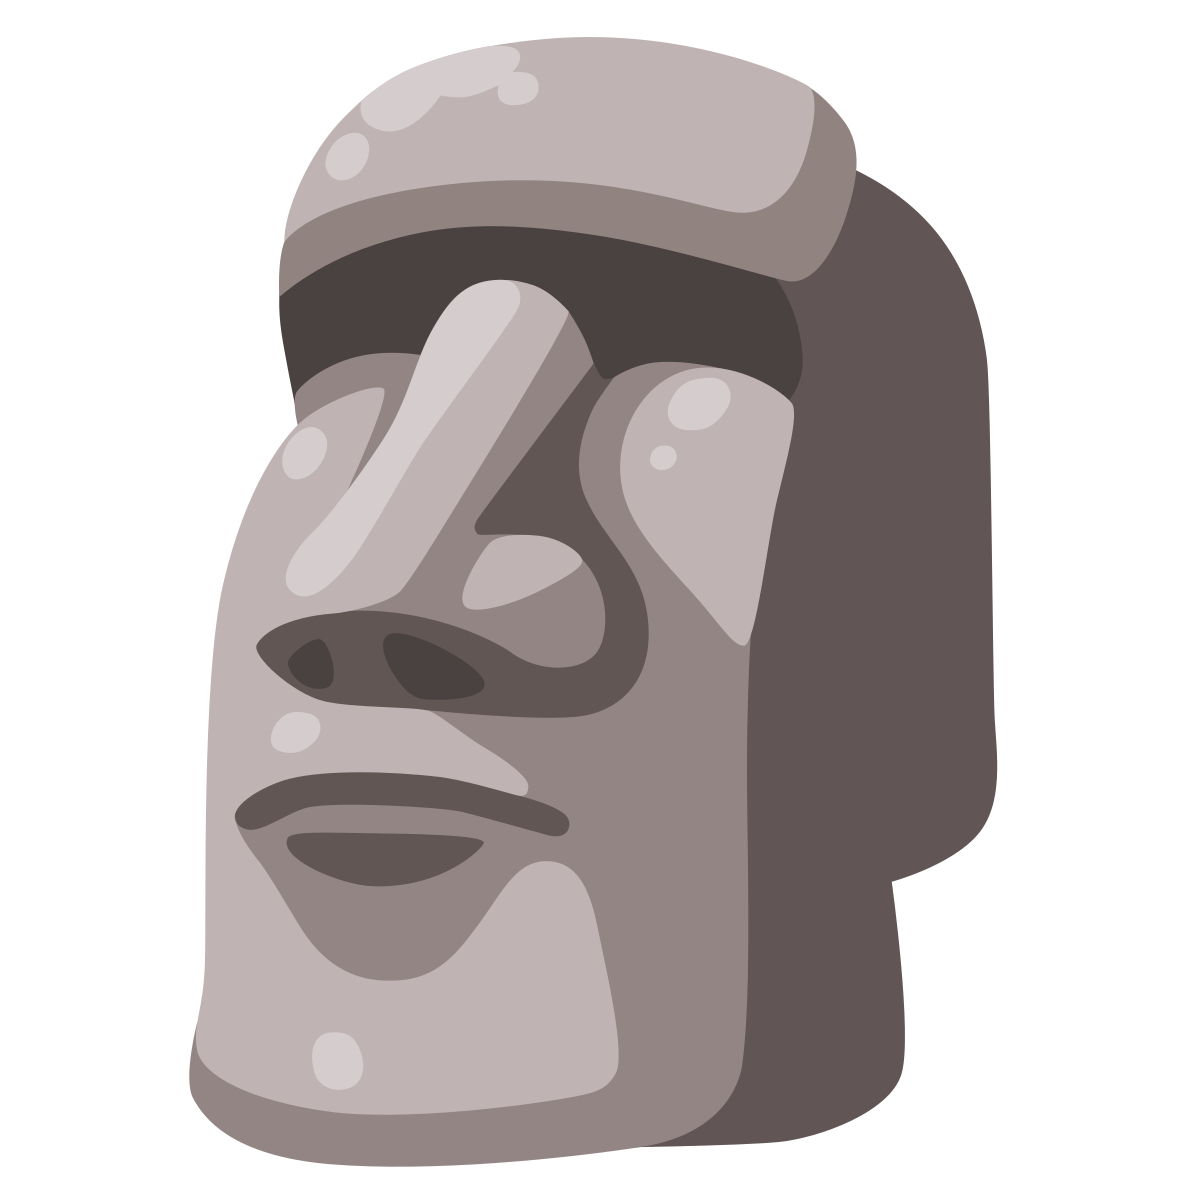 Everybody: The moai head emoji is the only acceptable emoji. The